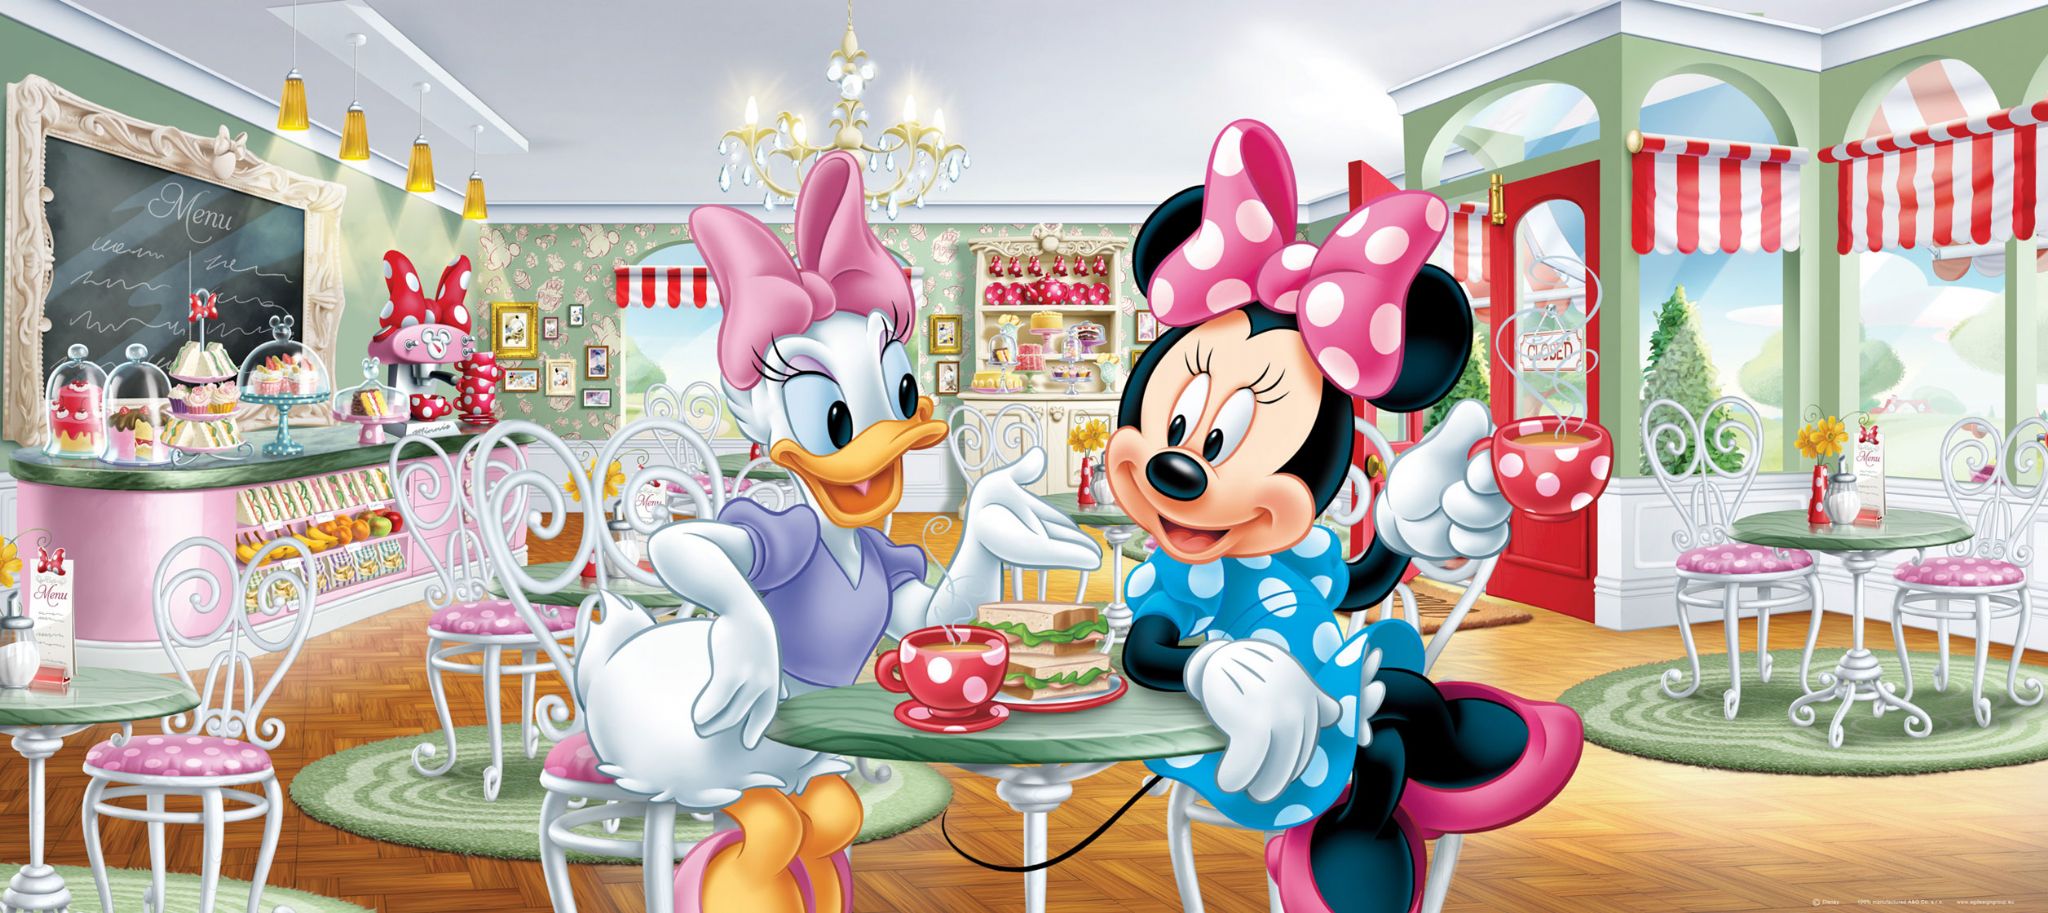 Disney Minnie Mouse Premium wall murals. Buy it now